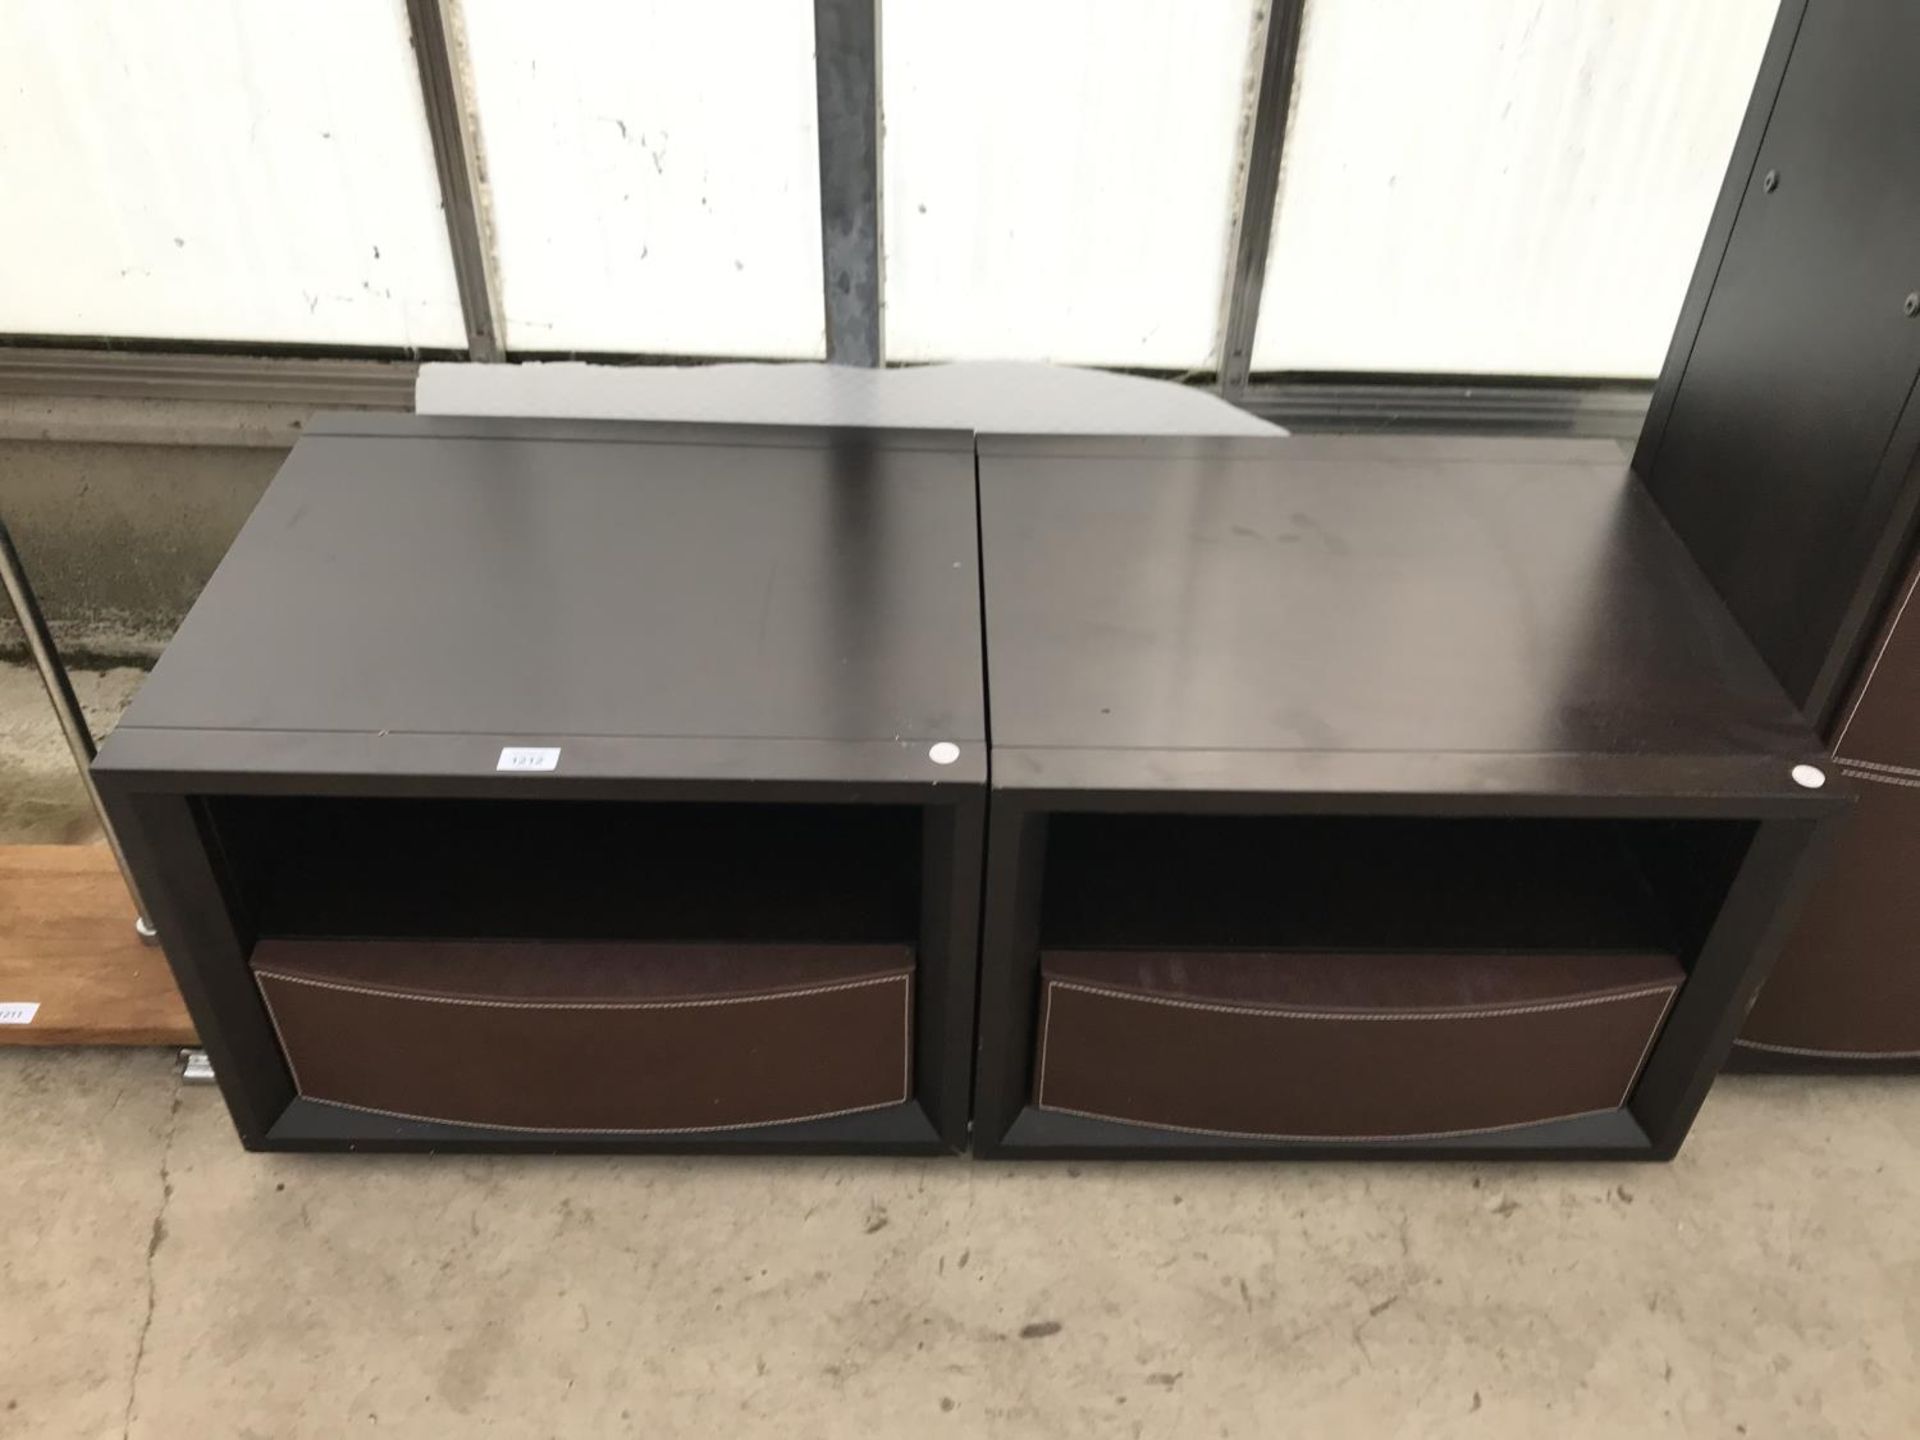 FIVE ITEMS OF MODERN BLACK FURNITURE - TWO CABINETS WITH SINGLE LEATHERETTE DRAWERS, A TALL - Image 2 of 4